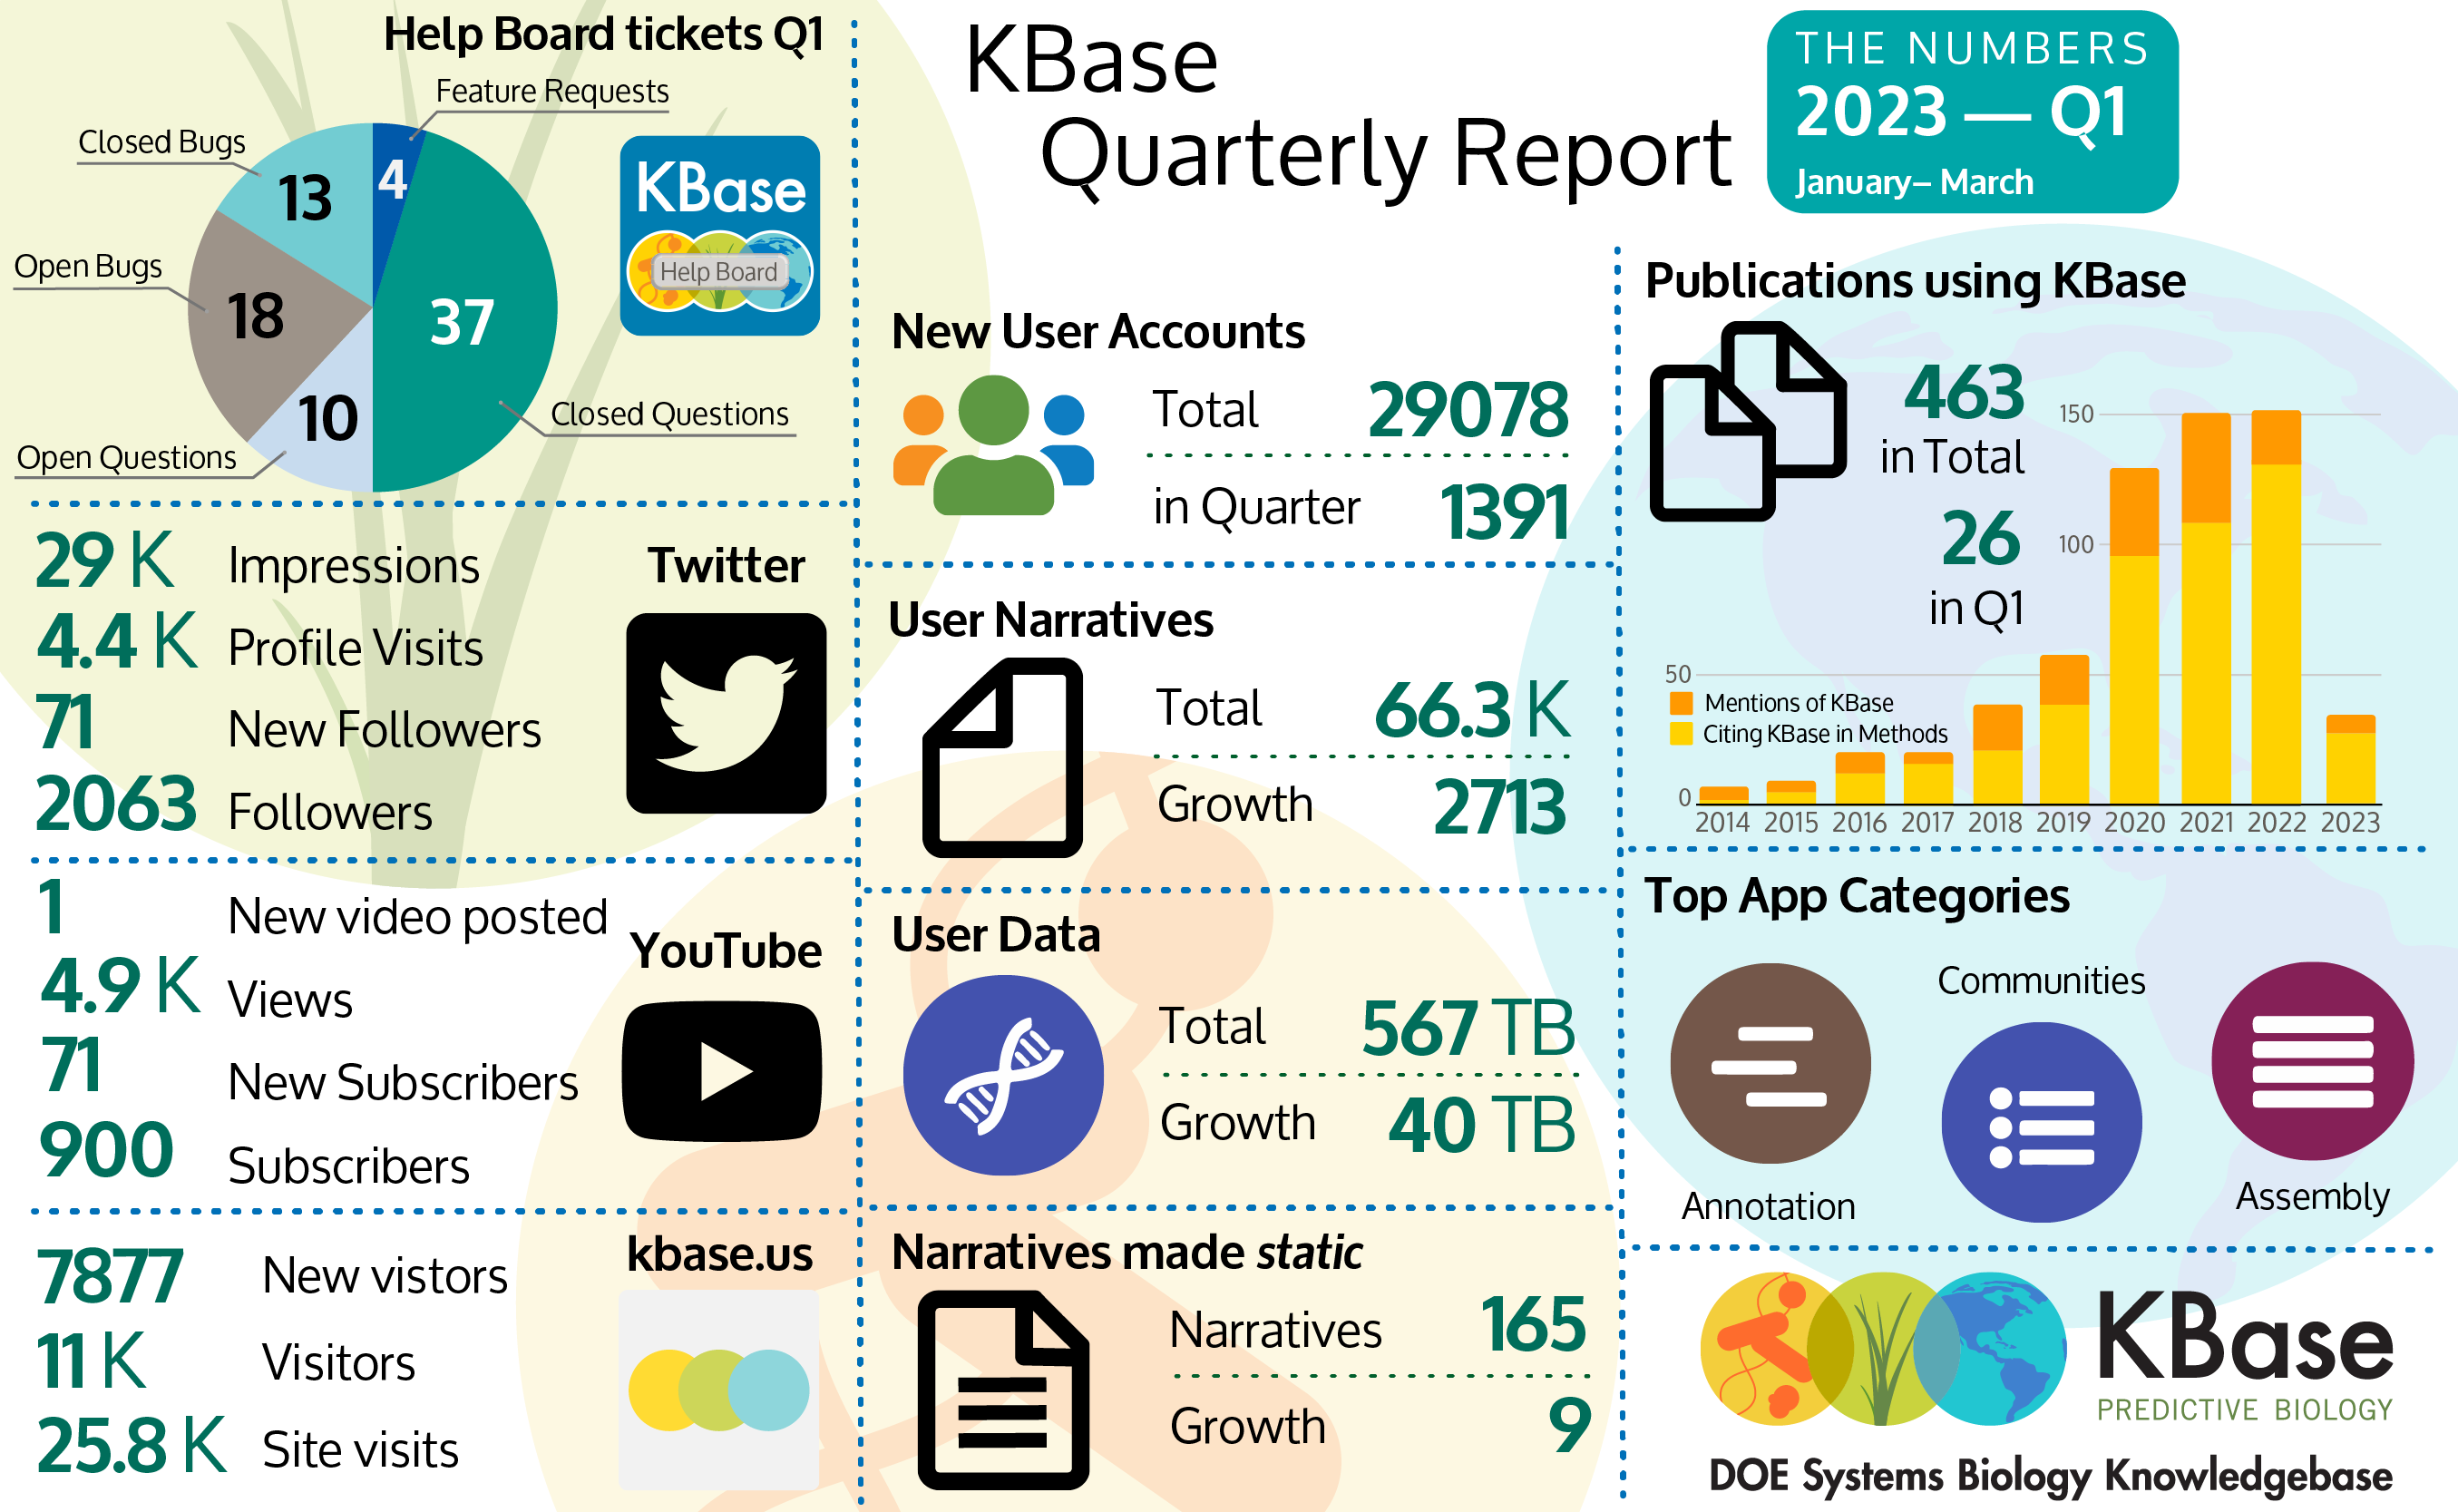 The graphic provides the following statistics for KBase from January to March 2023. Help Board Tickets had 4 Feature Requests, 37 Closed Questions, 10 Open Questions, 18 Open Bugs and 13 Closed Bugs that fill out a pie chart. Twitter had 29,000 Impressions, 4,400 Profile Visits, 71 new followers and 2063 total followers. YouTube had 1 new video posted with 4,900 views, 71 new subscribers for a total of 800 subscribers; the kbase.us site had 7,877 new visitors, 11,000 total visitors and 25,800 visits to the site. There were 1391 new user accounts added to the platform for a total of 29078 accounts. The total number of Narratives is 66,300 with 2,713 new Narratives. User data grew by 40 terabytes for a total of 567 terabytes. One hundred sixty five different Narratives have been made publicly available, with 9 new Narratives. Twenty six new publications cited using KBase for a total of 463 publications since 2014. Top App categories were annotation, metagenomics, and assembly. 